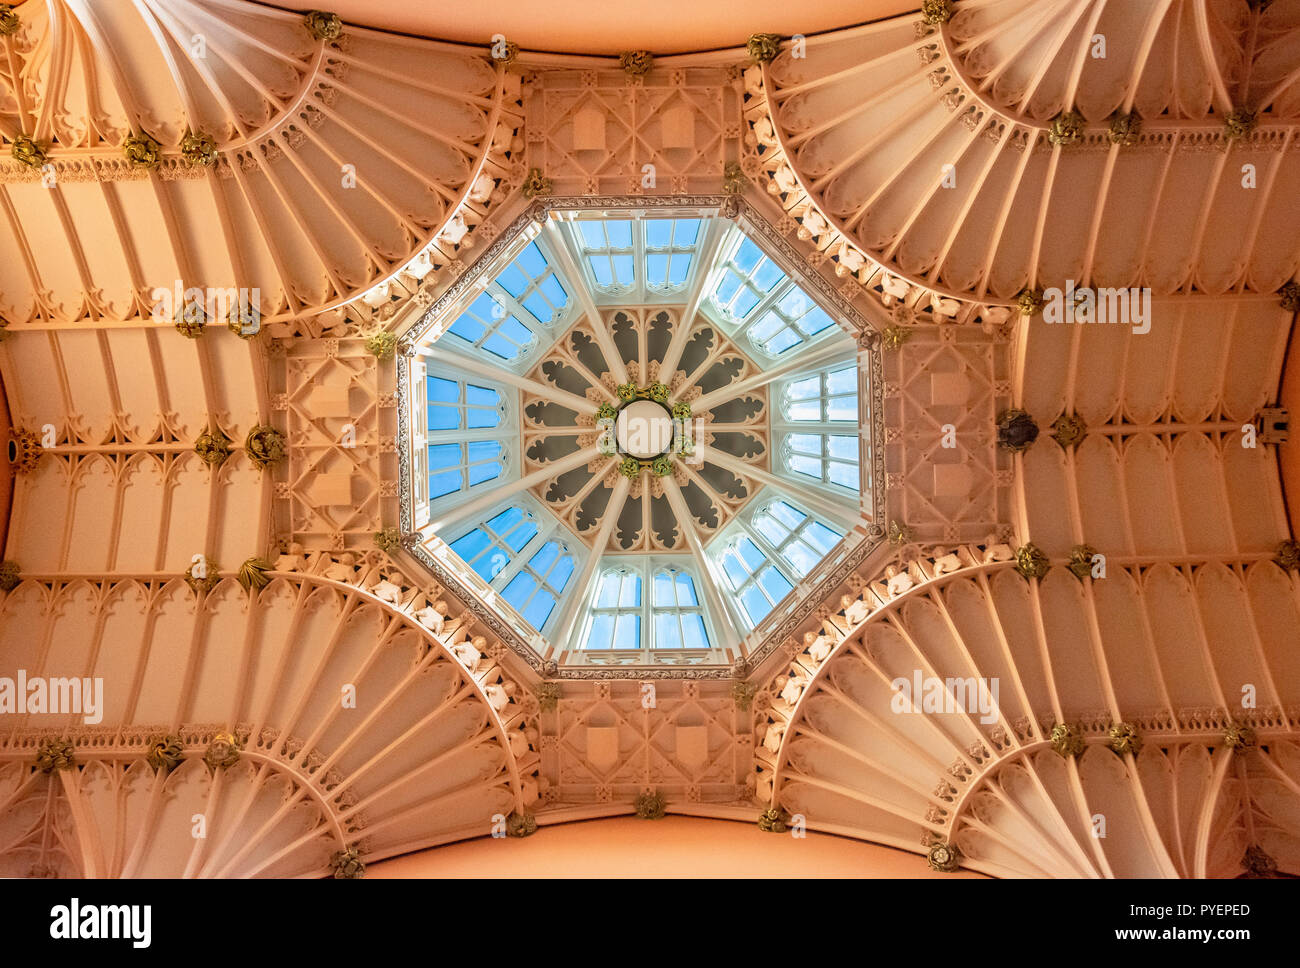 Entrance ceiling in The State Apartments, Windsor Castle, Windsor, Berkshire, England, United Kingdom Stock Photo